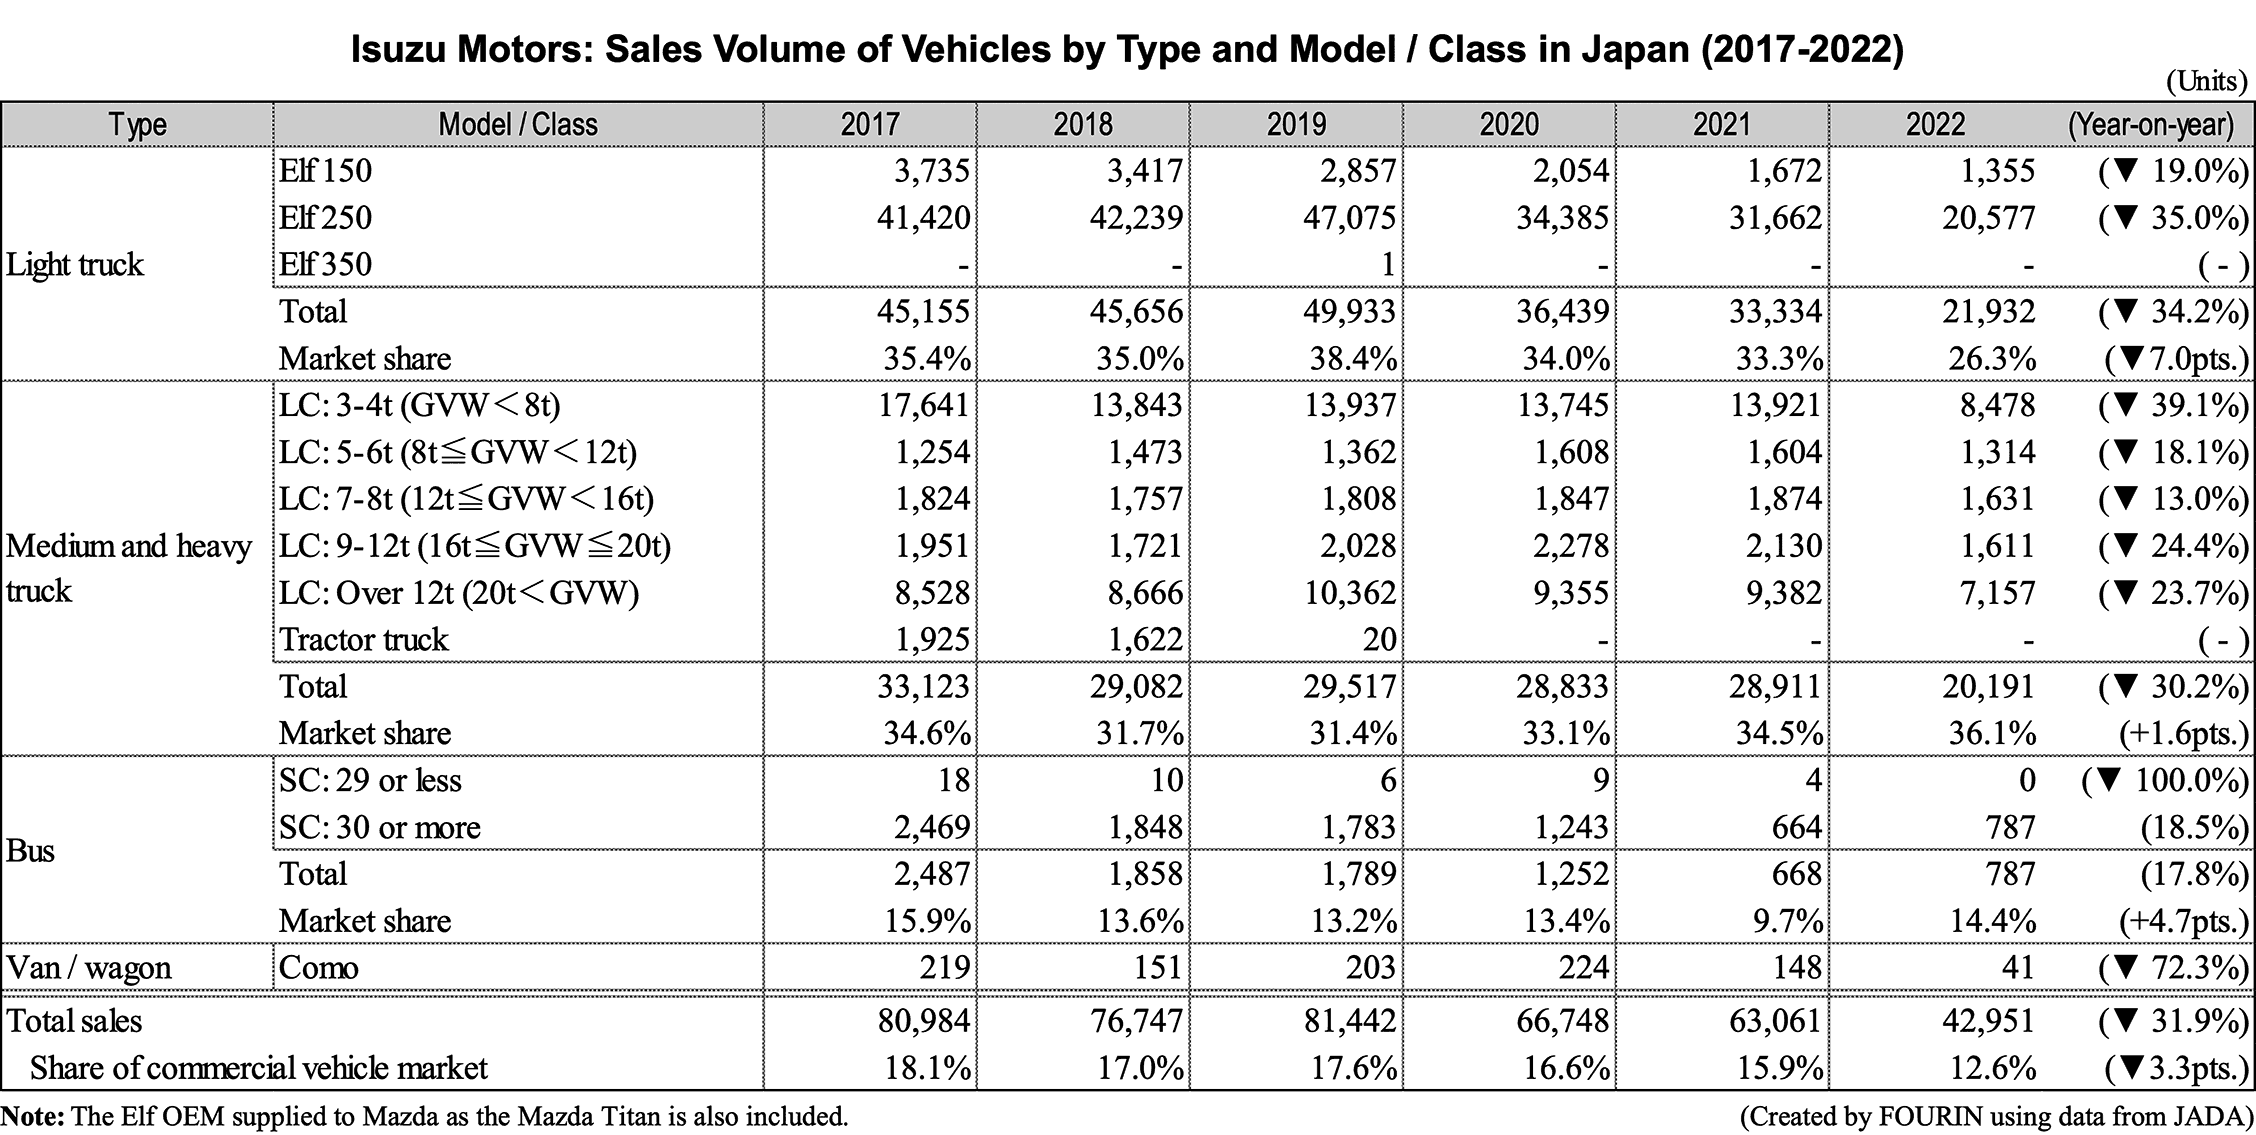 Isuzu Motors: Sales Volume of Vehicles by Type and Model / Class in Japan (2017-2022)